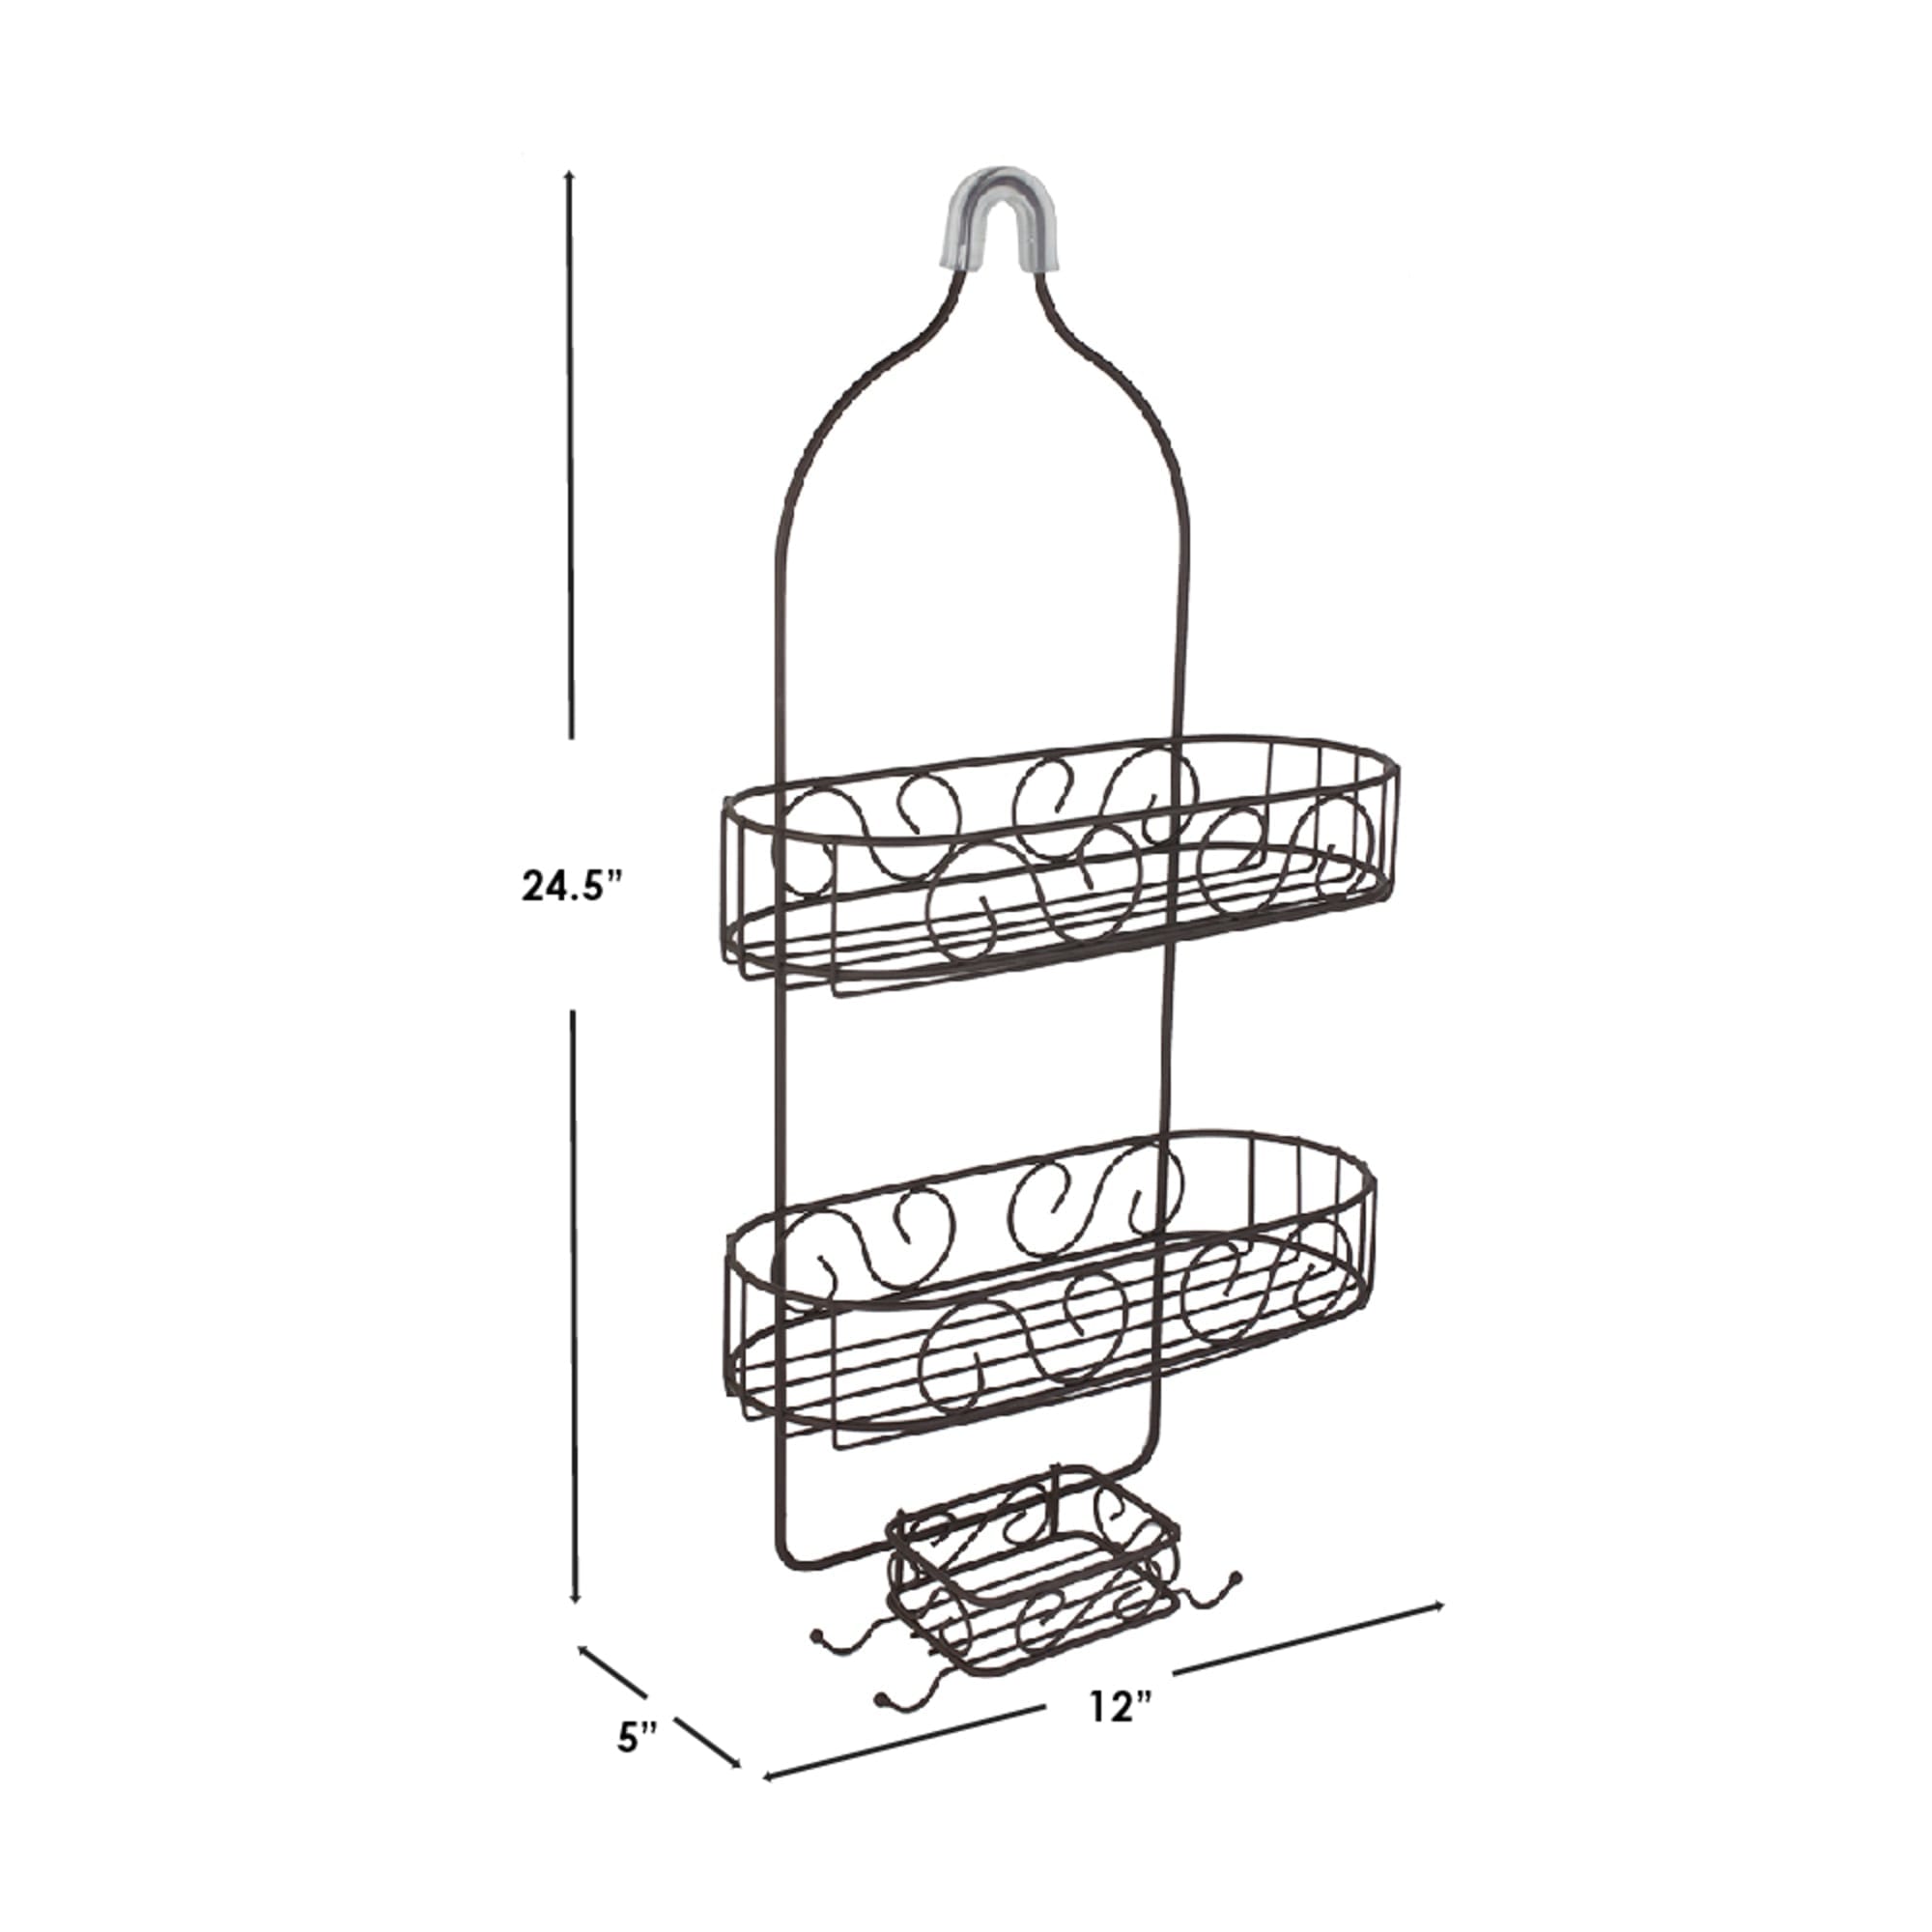 Home Basics Scroll Shower Caddy $15.00 EACH, CASE PACK OF 12